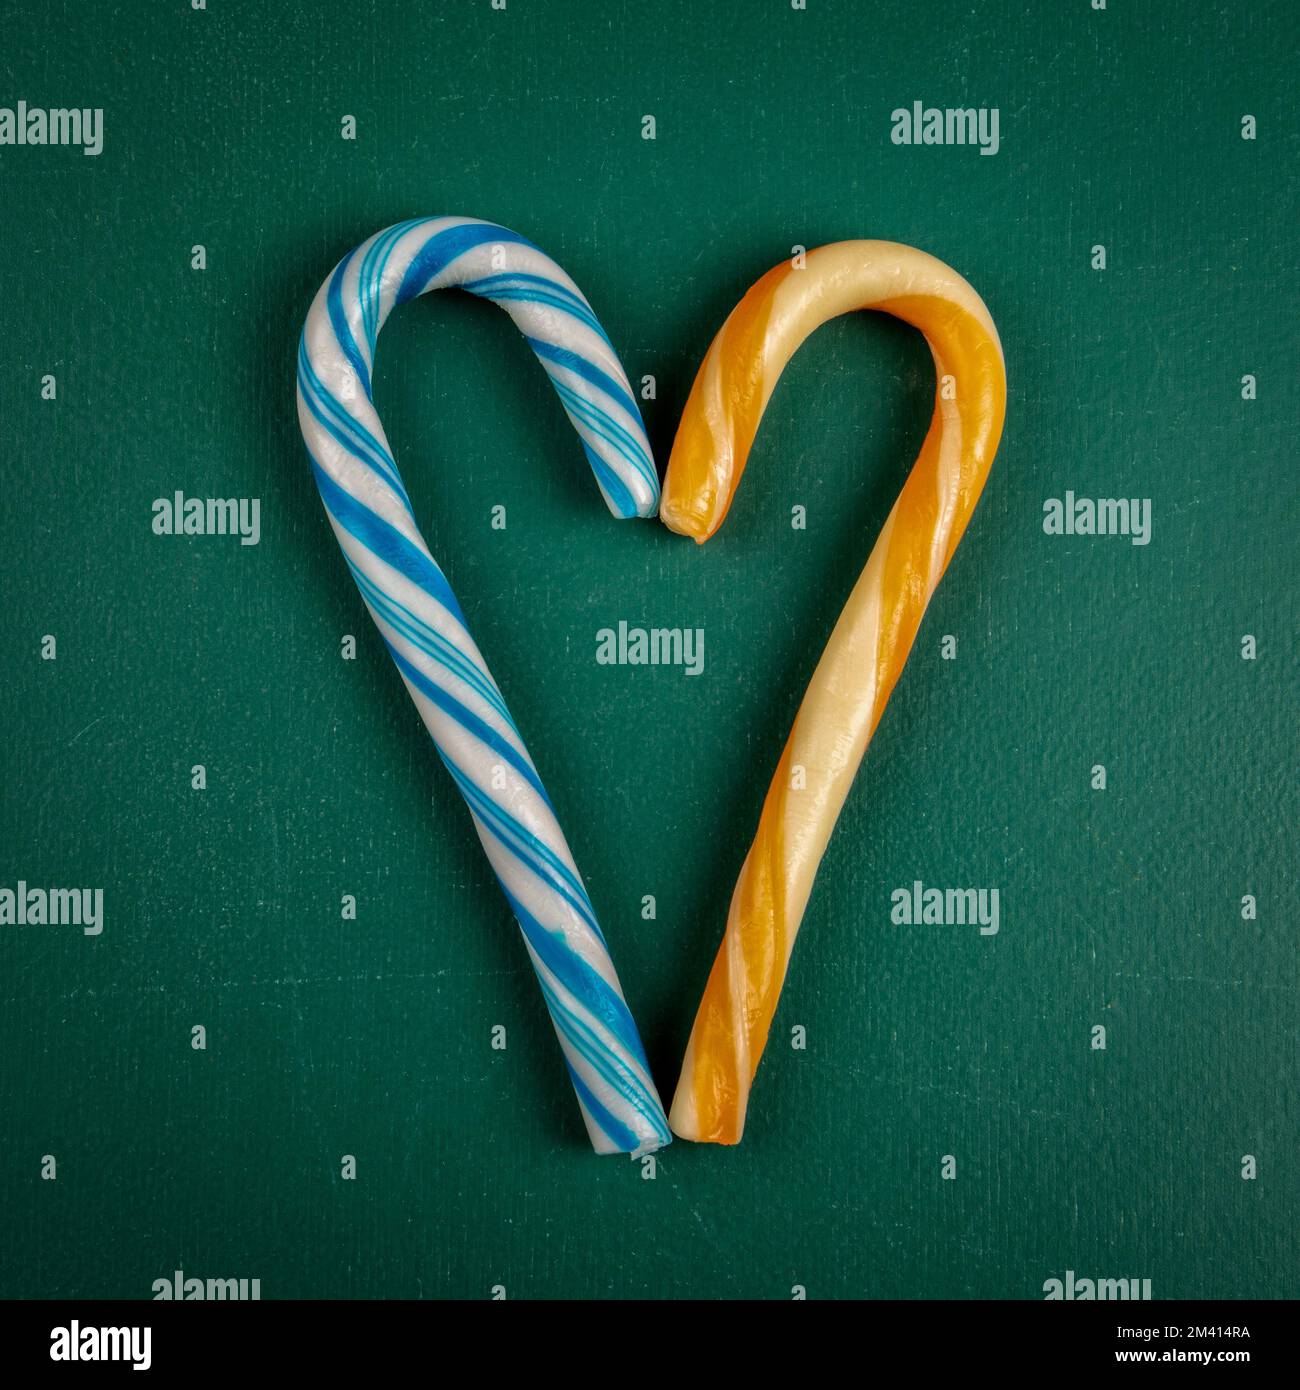 Candy canes on a green chalkboard. Christmas and holidays concept. Stock Photo